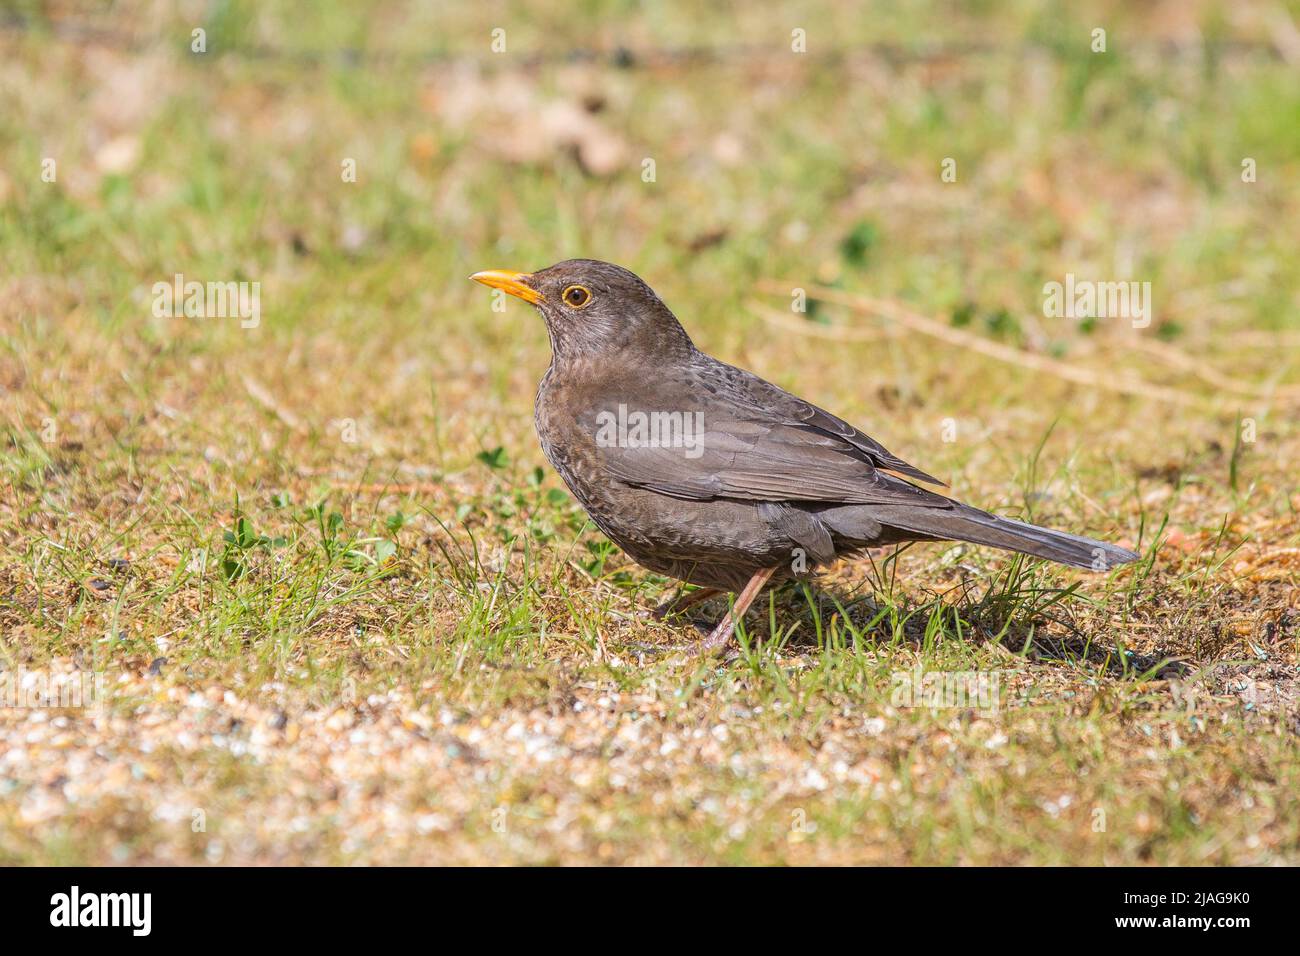 foraging blackbird, Turdus merula, male on the ground in the grass with orange bill and dark to black plumage Stock Photo